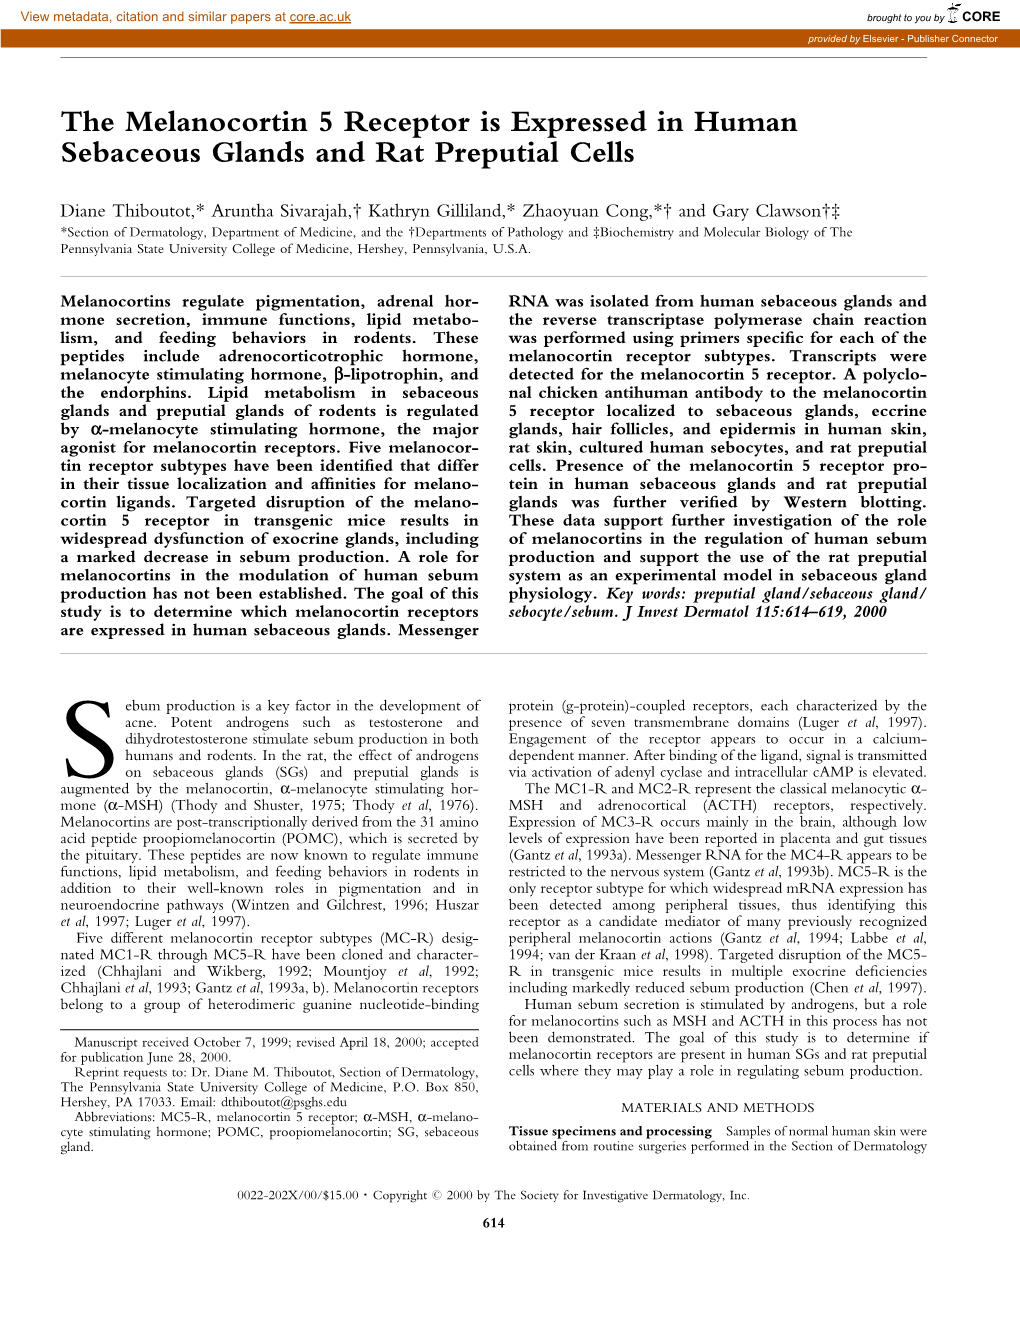 The Melanocortin 5 Receptor Is Expressed in Human Sebaceous Glands and Rat Preputial Cells